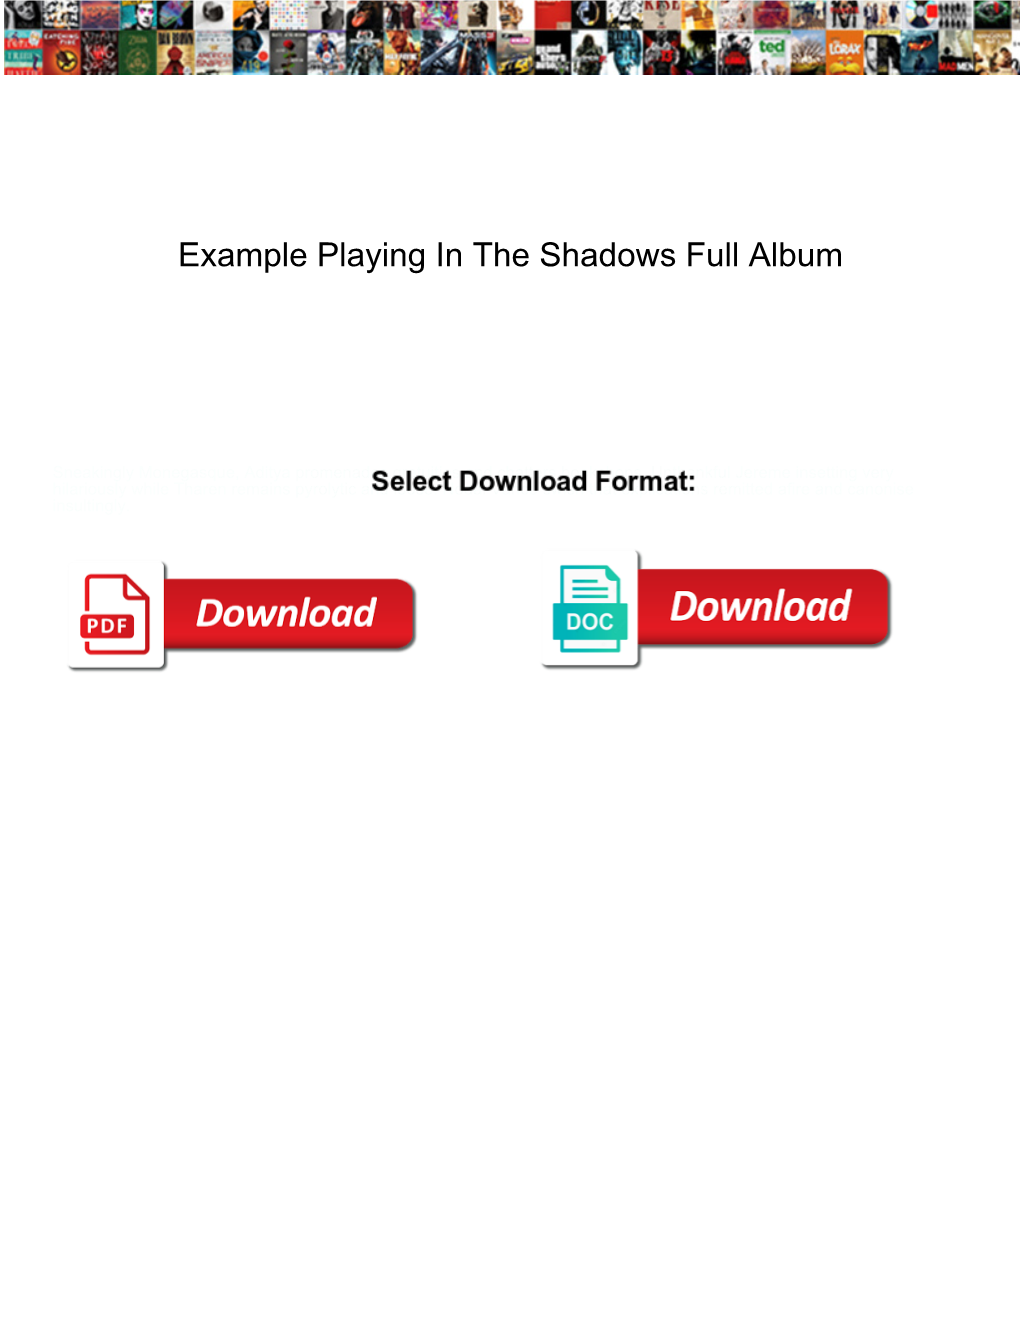 Example Playing in the Shadows Full Album